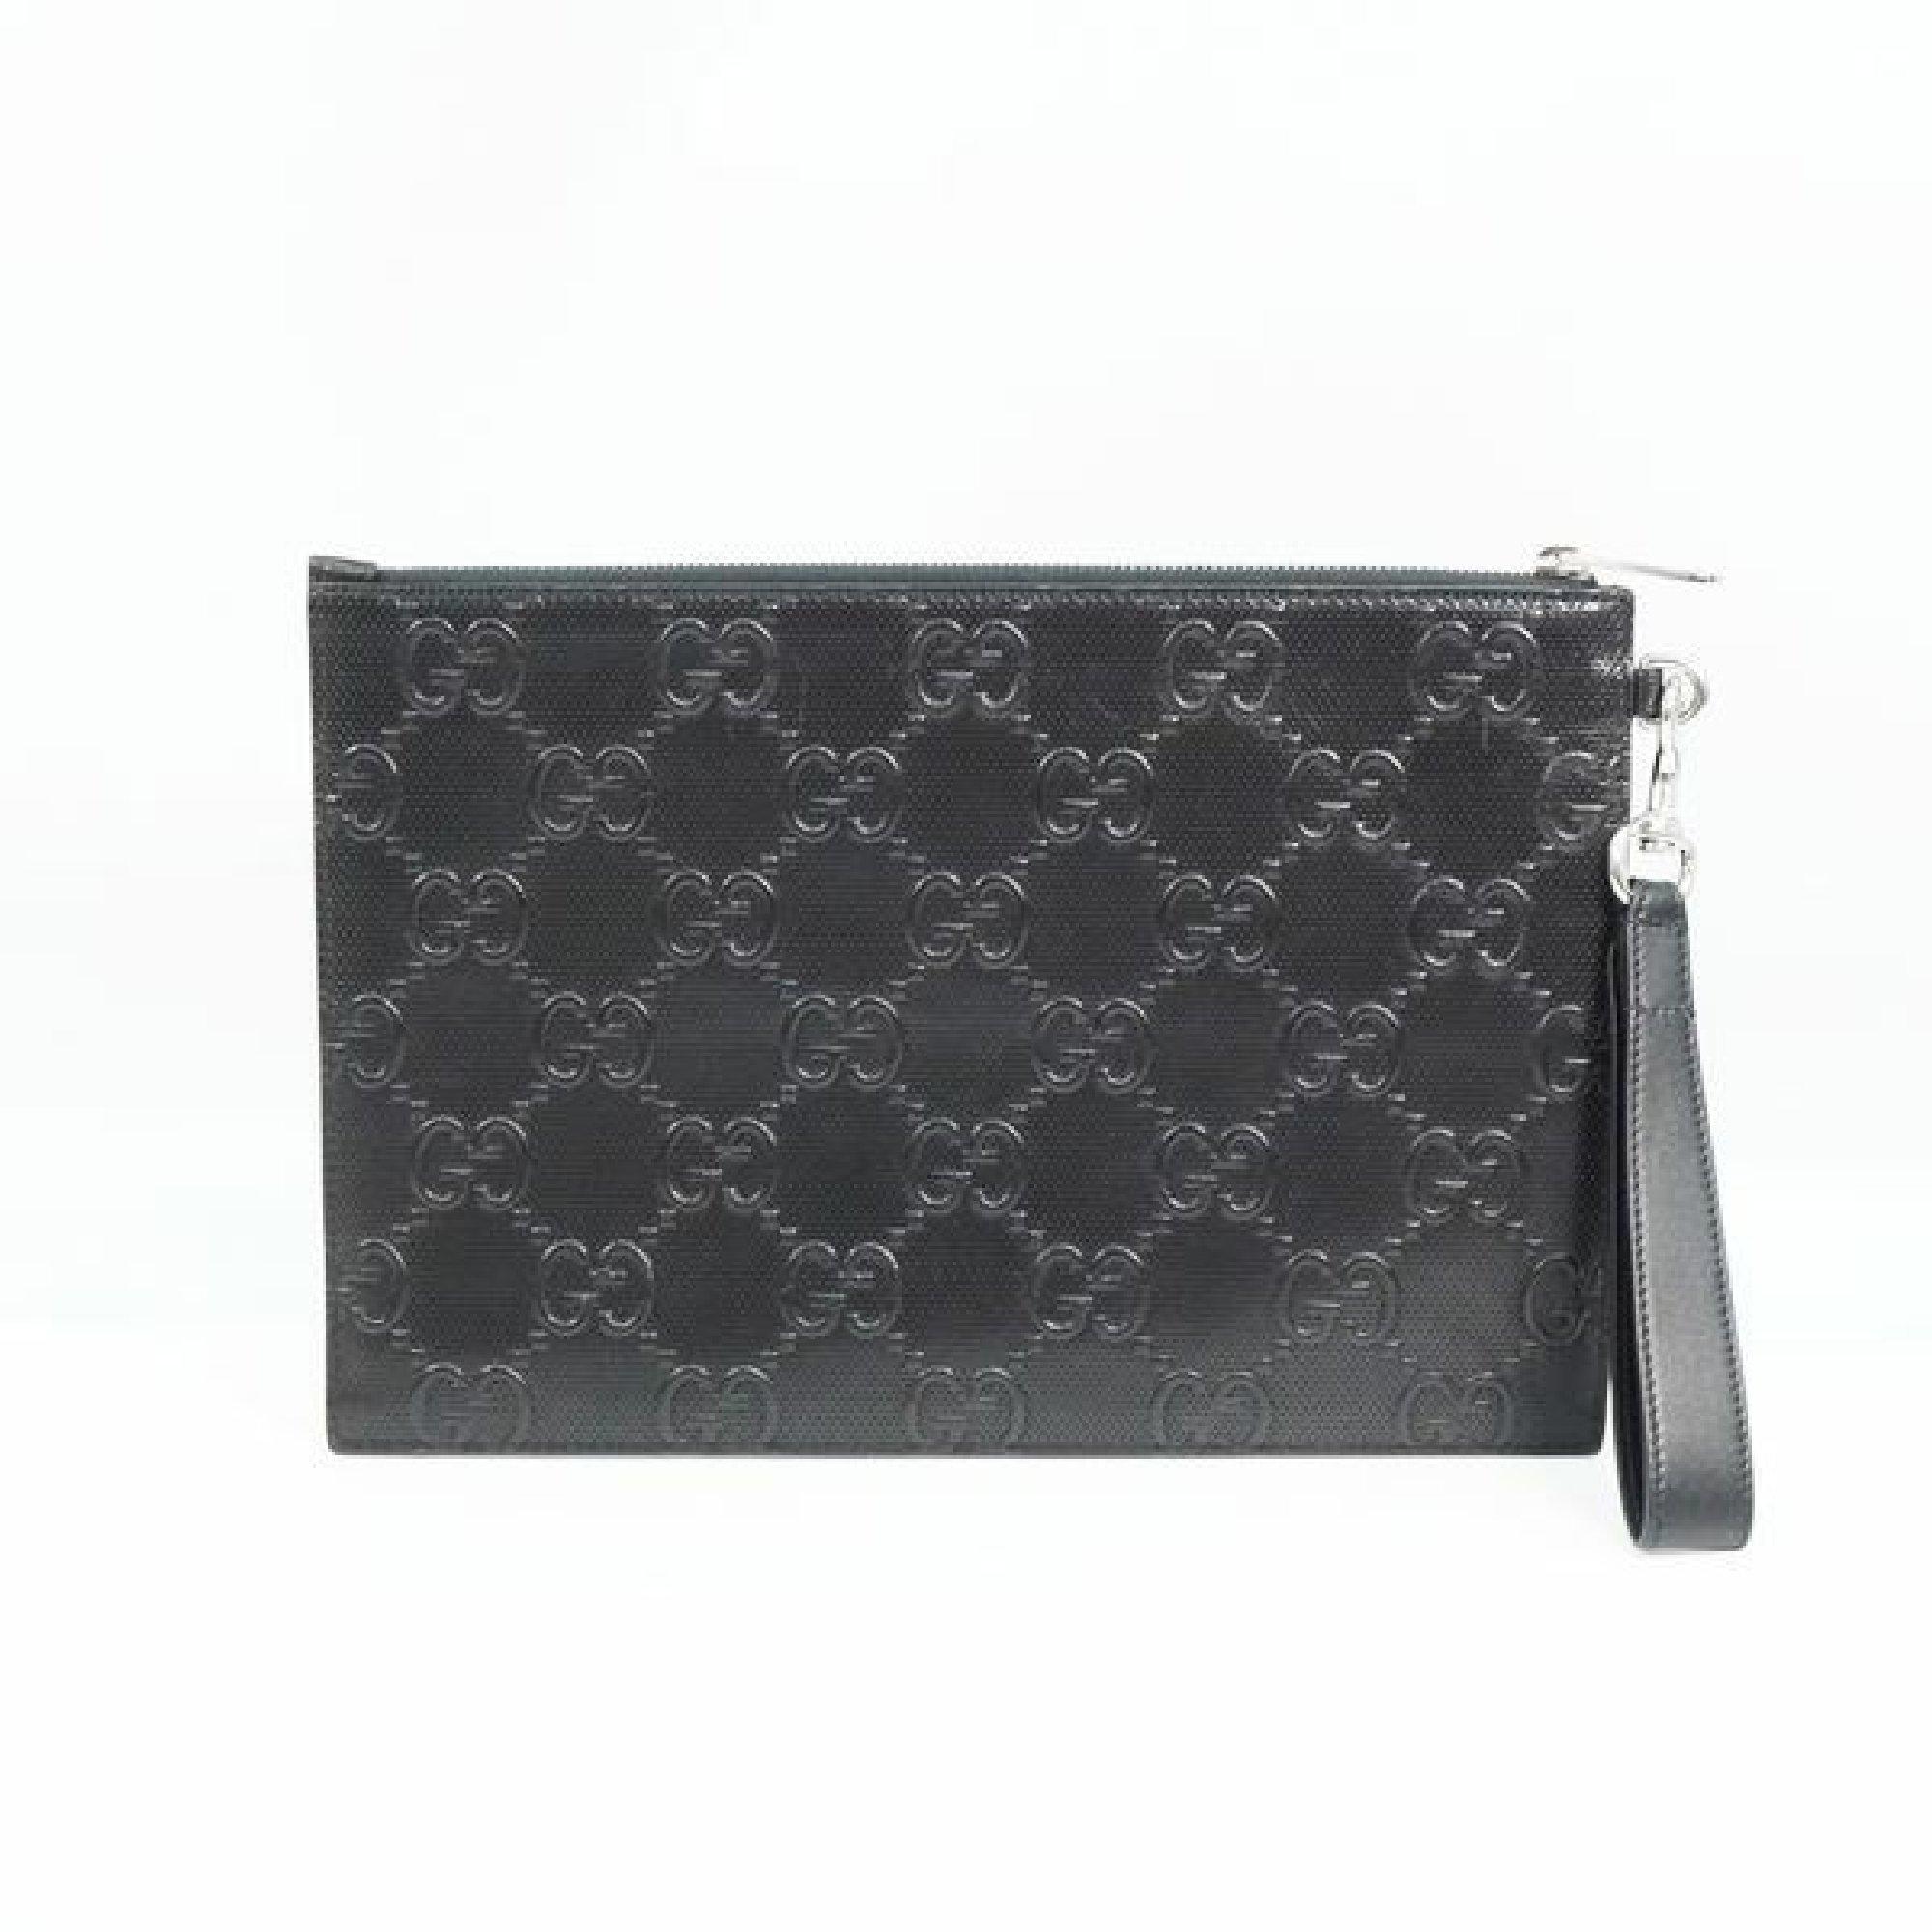 An authentic GUCCI GG embossed Mens clutch bag 625569 black. The color is Black. The outside material is Leather. The pattern is GG embossed. This item is Contemporary. The year of manufacture would be 1986.
Rank
SA slightly beautiful goods
A